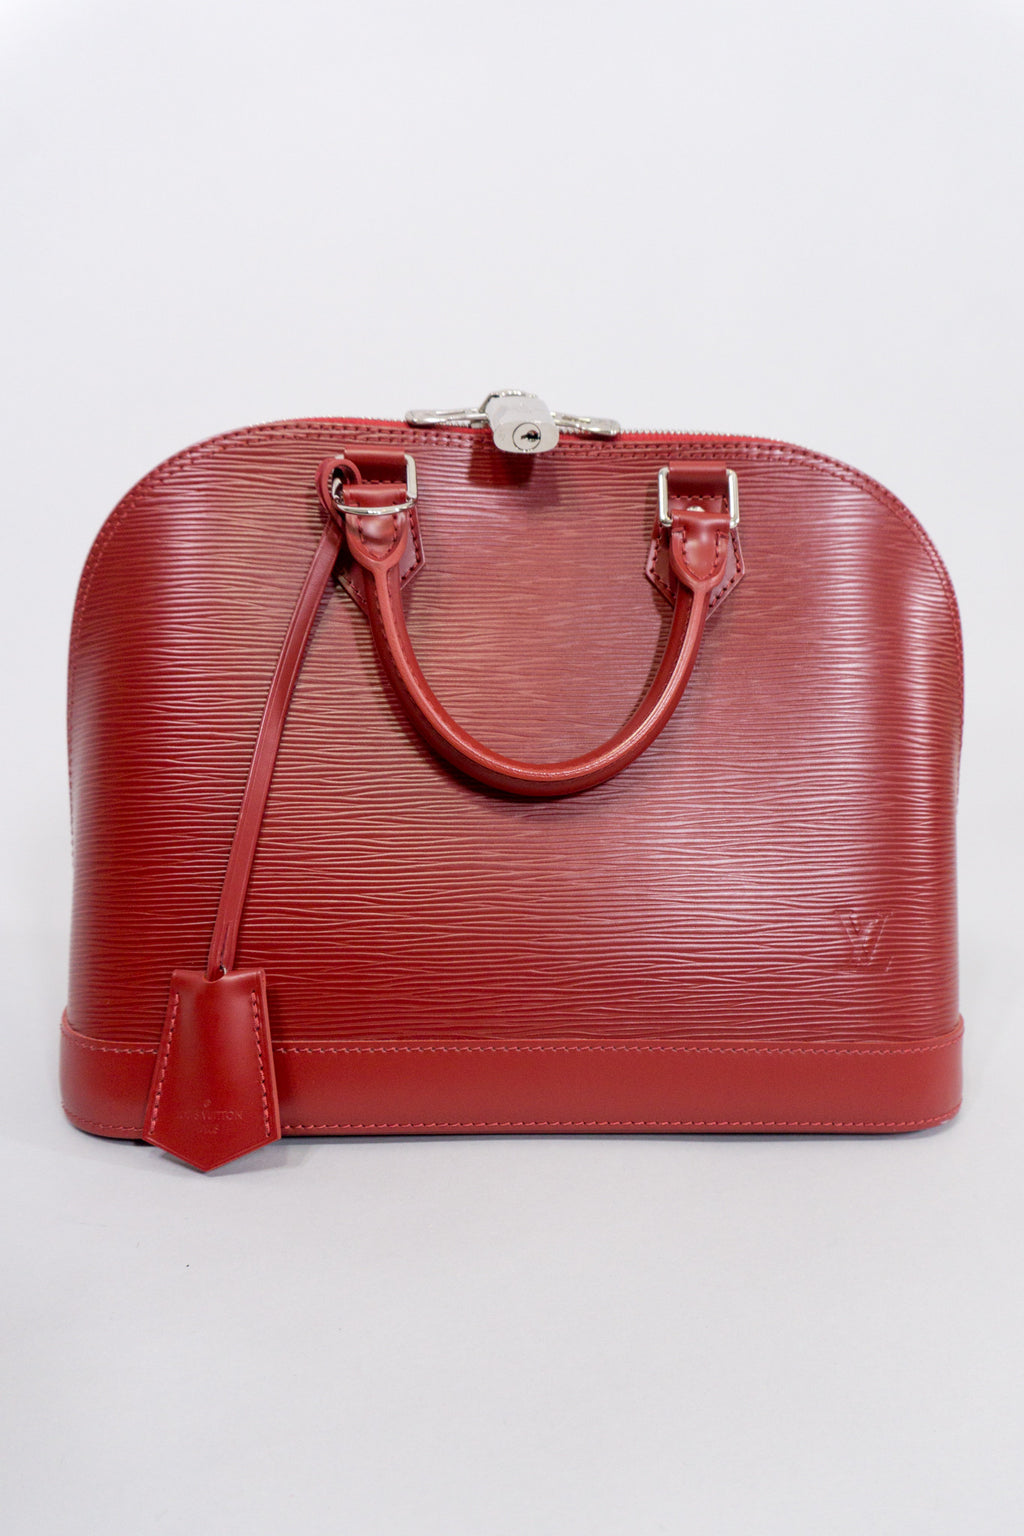 Authentic Louis Vuitton Red Epi Leather Alma PM Hand Bag – Italy Station